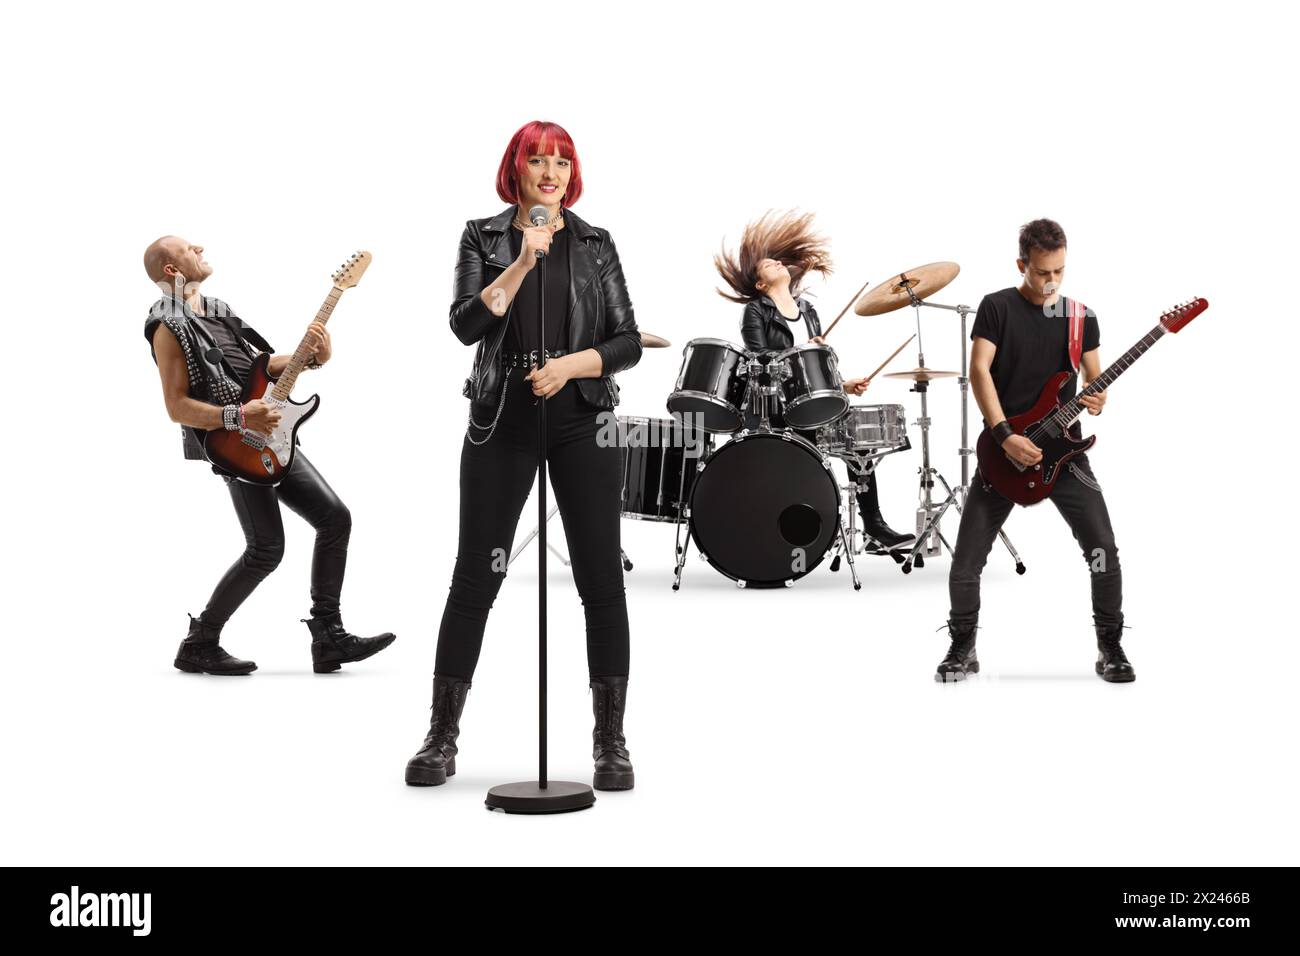 Rock band performing with a lead female singer isolated on white background Stock Photo